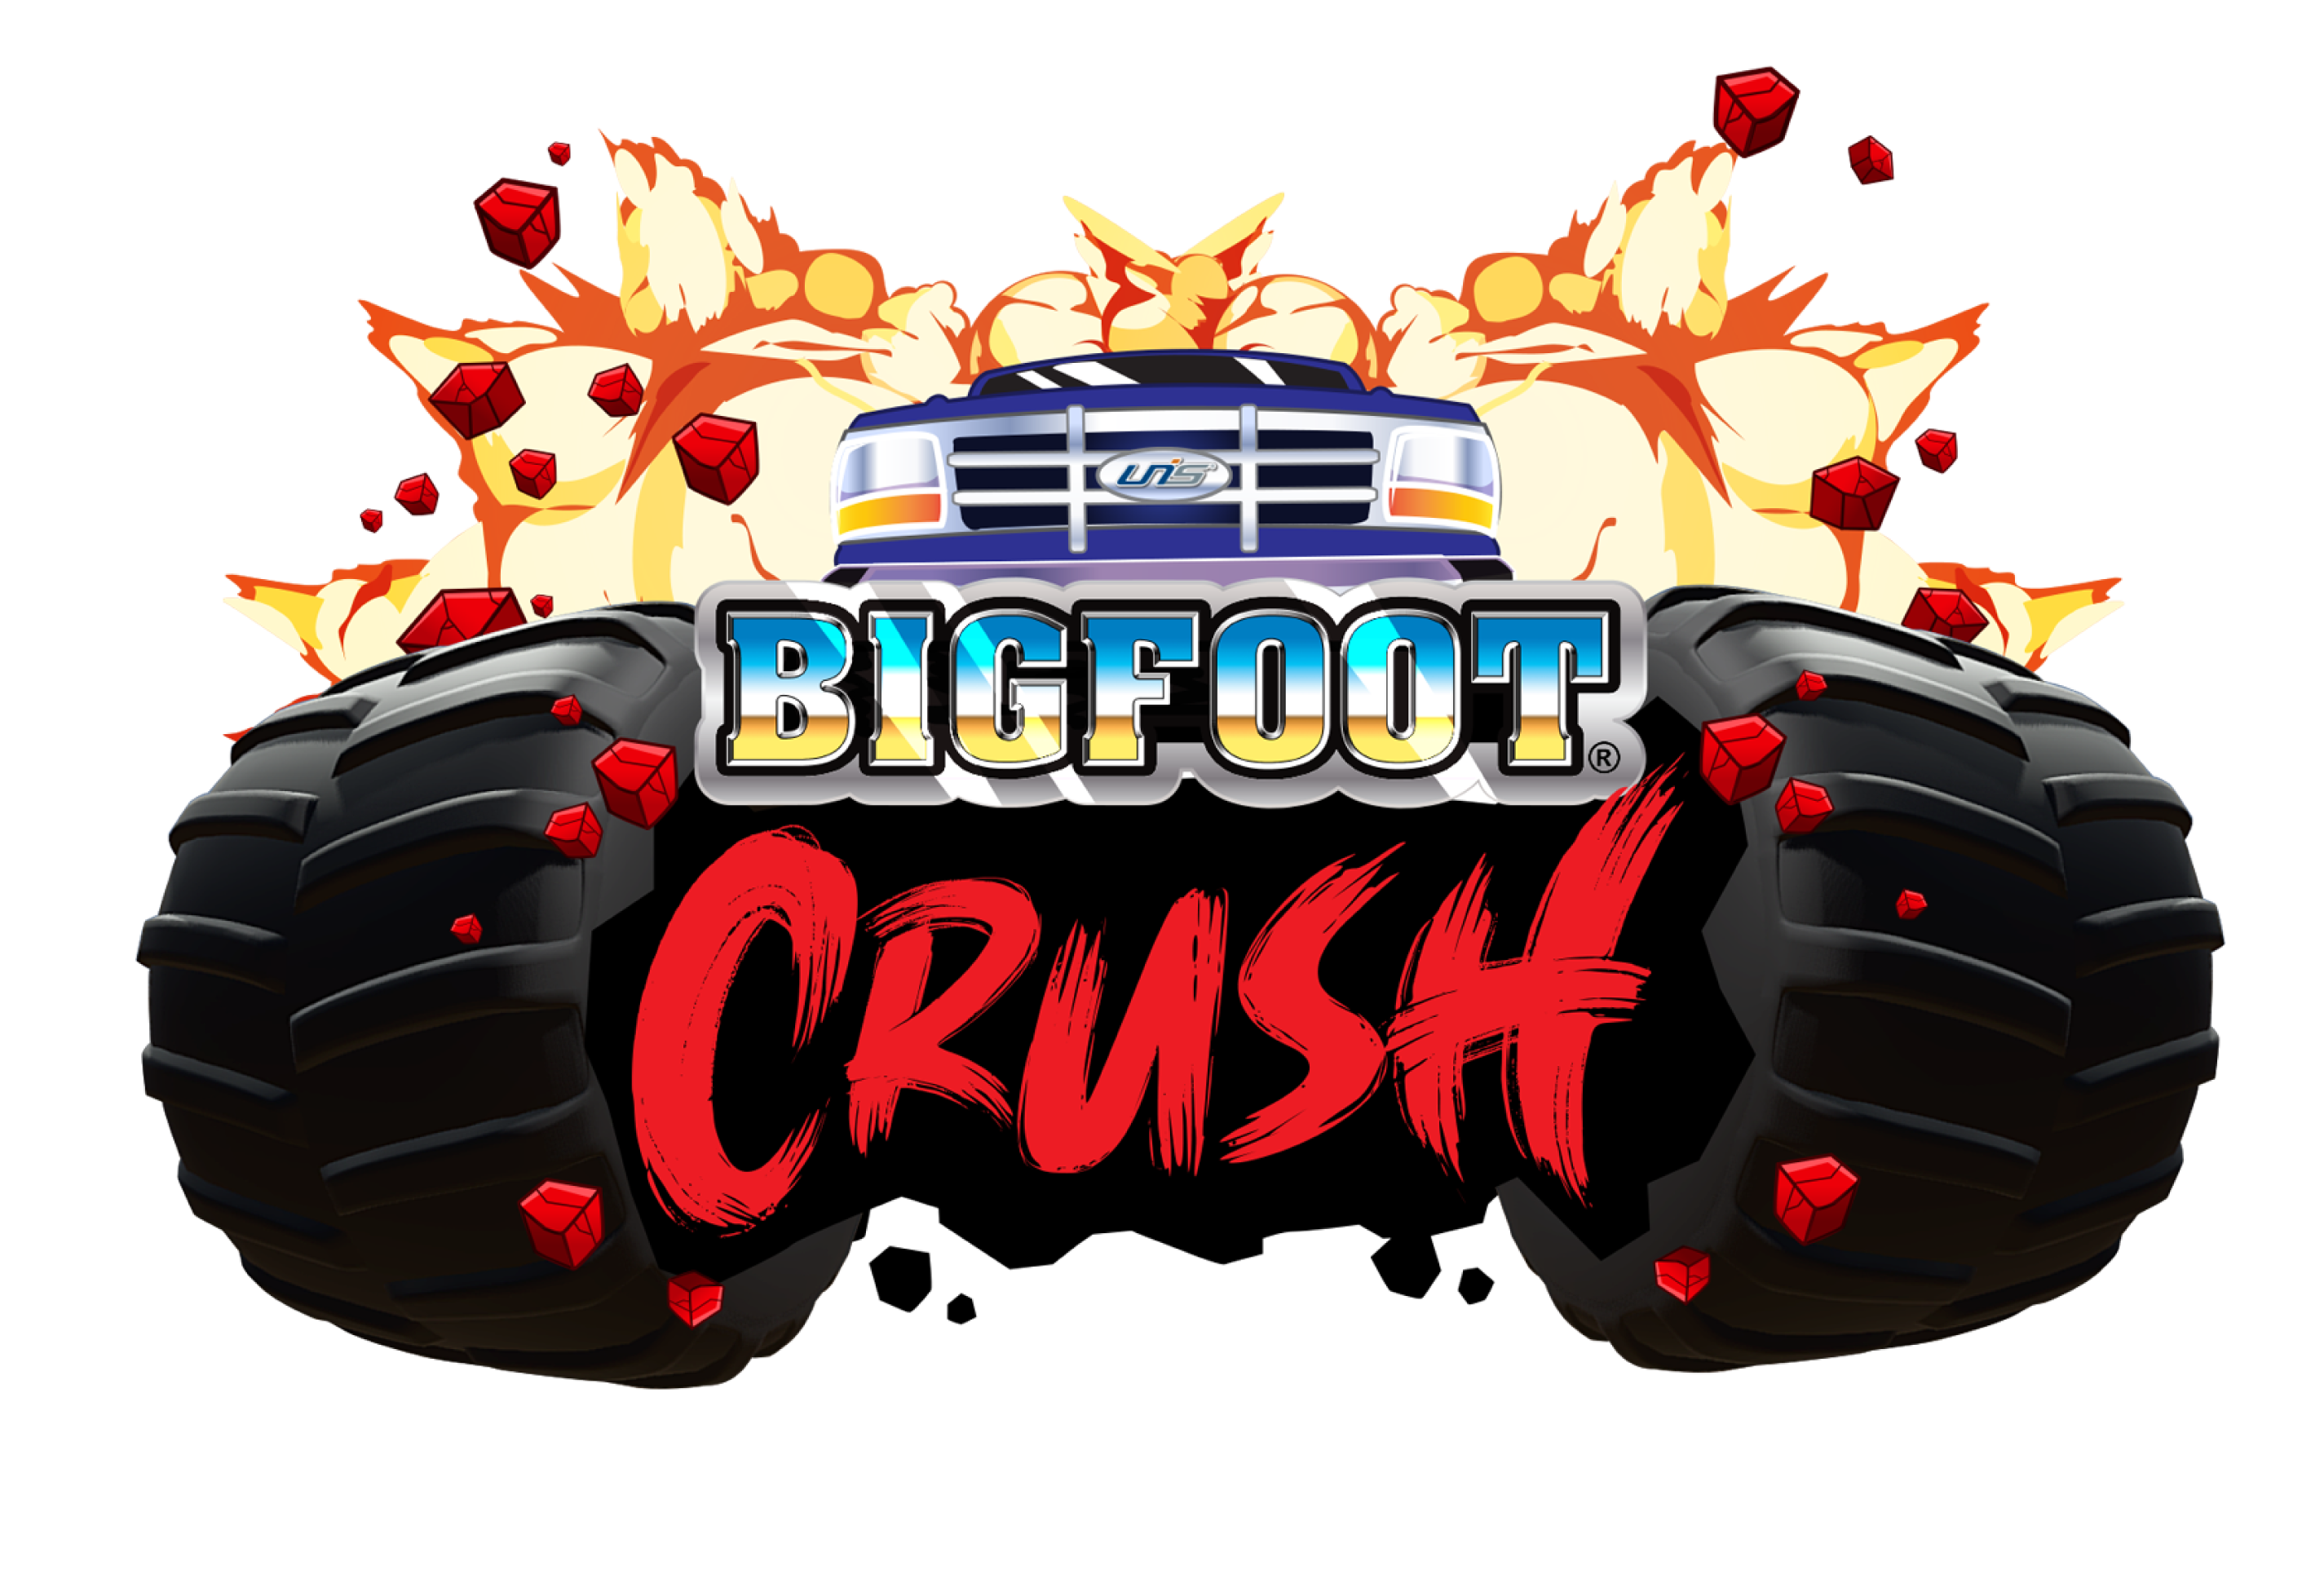 BIGFOOT 4X4, INC. - The official BIGFOOT monster truck video game